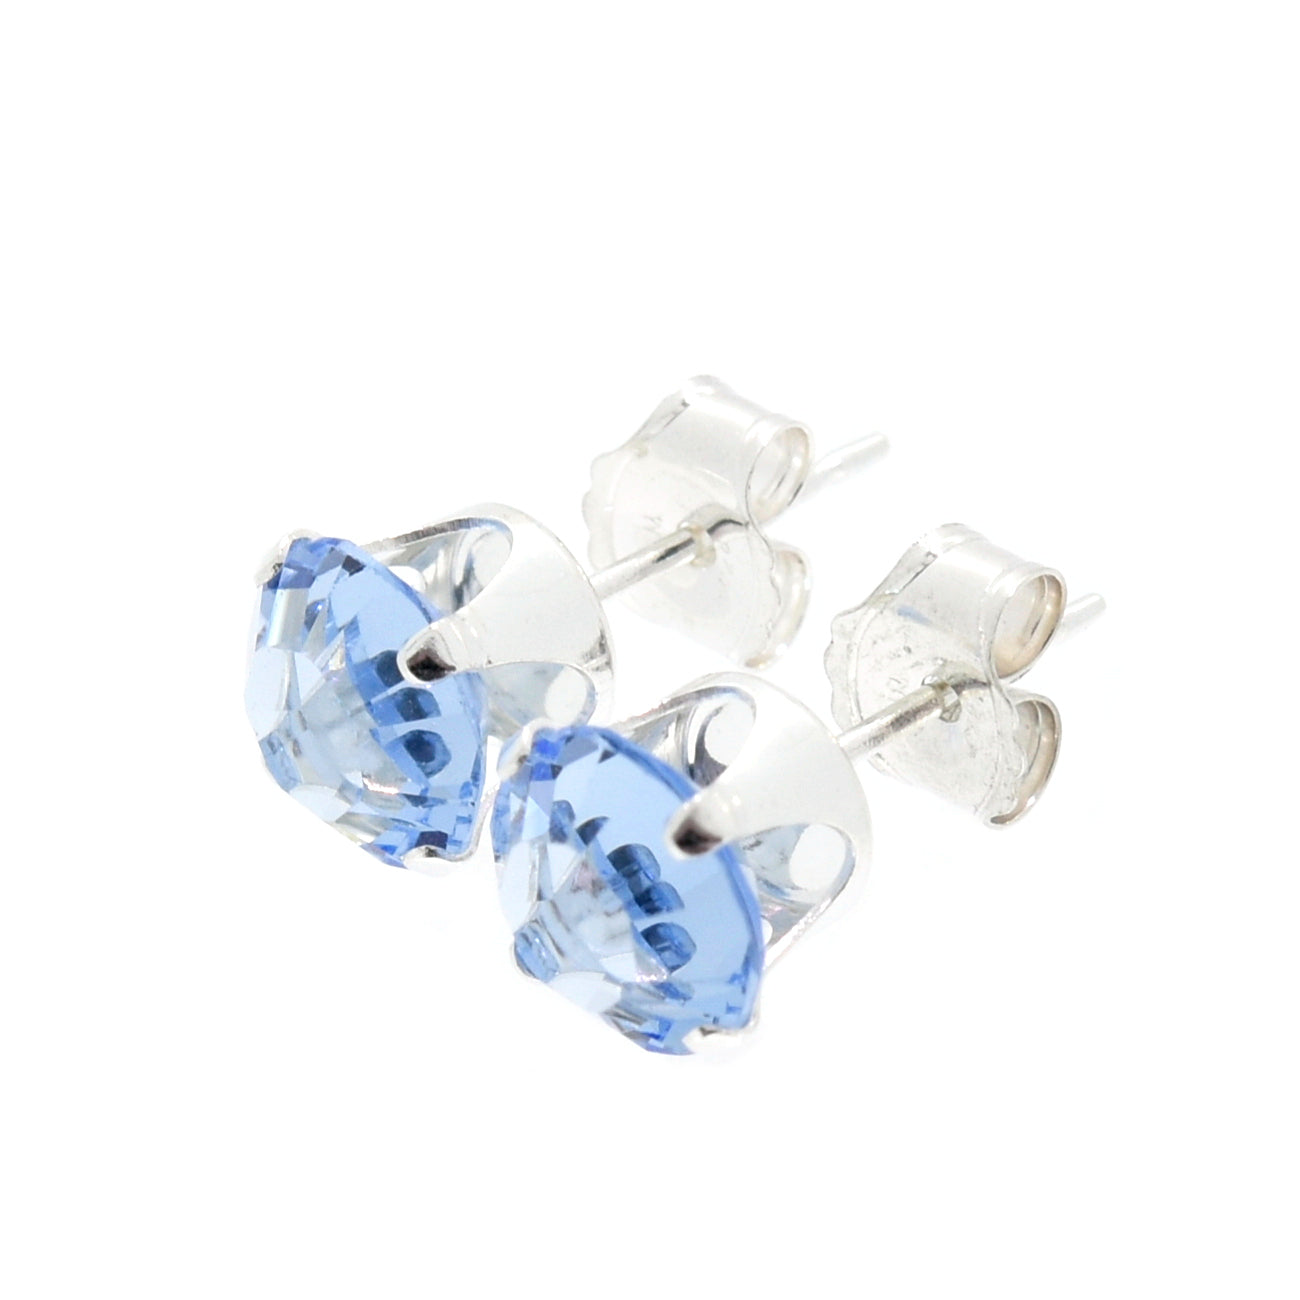 pewterhooter® Women's Classic Collection 925 Sterling silver earrings with sparkling Light Sapphire Blue channel crystals, packaged in a gift box for any occasion.